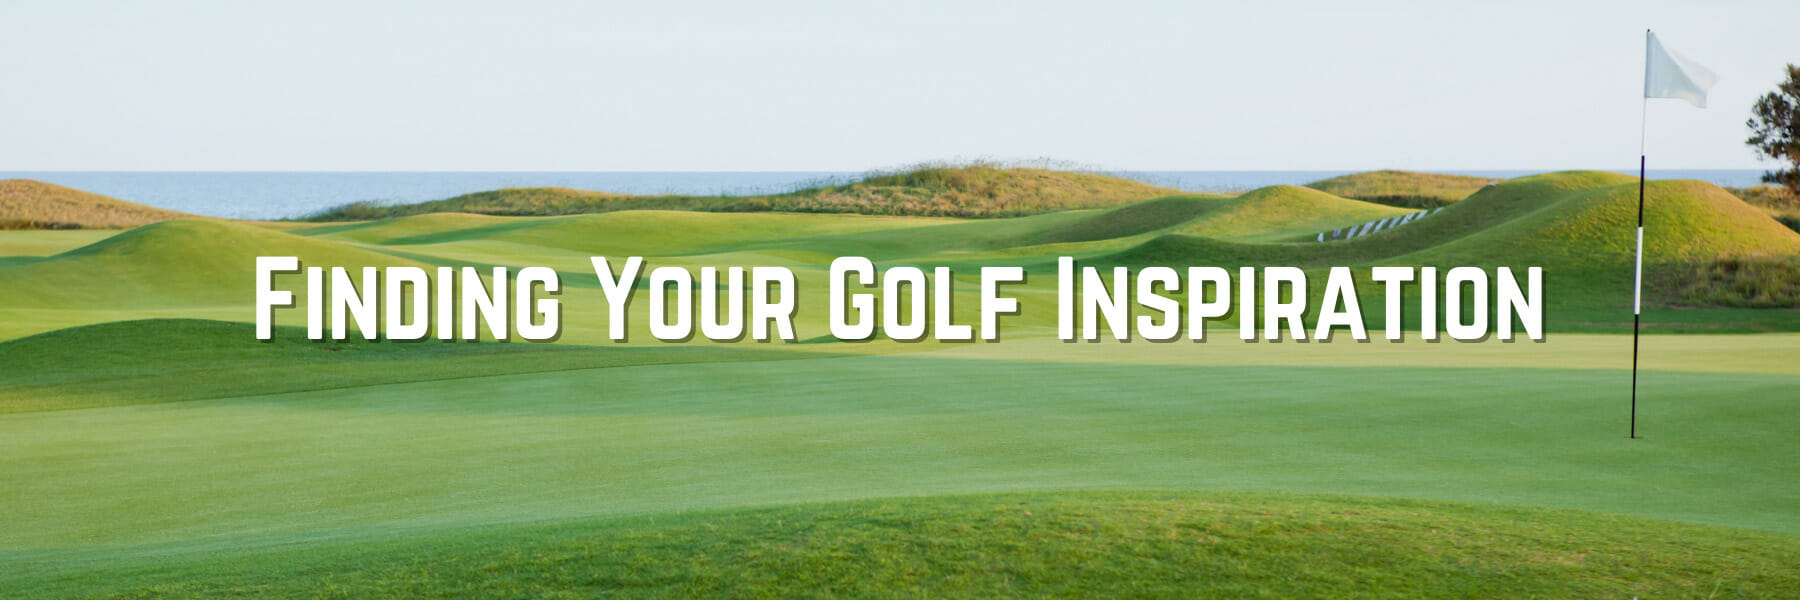 Finding Your Golf Inspiration